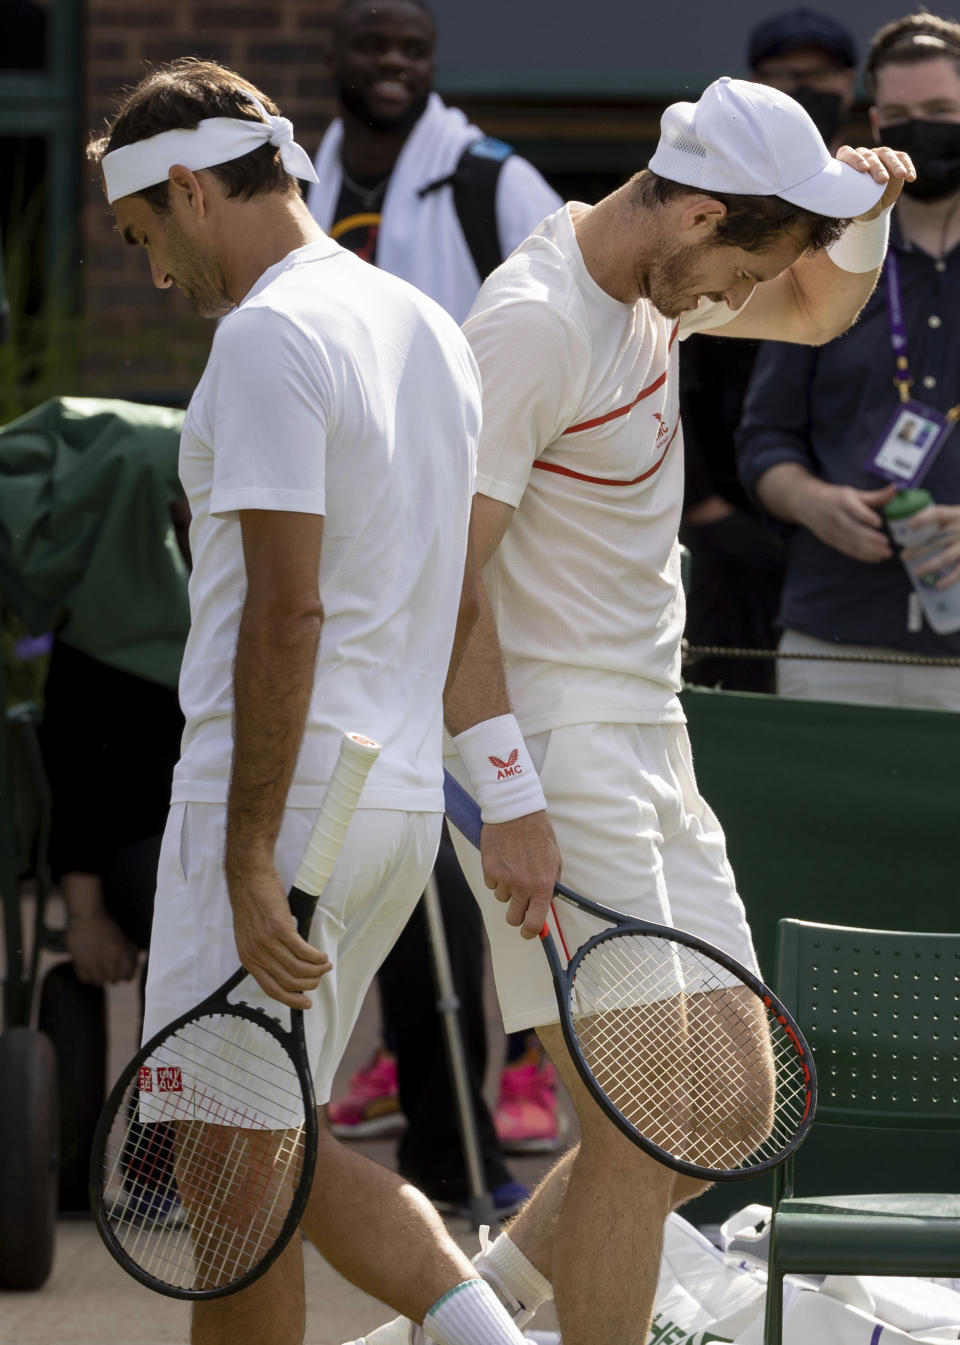 Switzerland's Roger Federer, left, and Britain's Andy Murray on Court 14 for a practice session prior to the Wimbledon Tennis Championships in London, Friday June 25, 2021. (David Gray/Pool via AP)